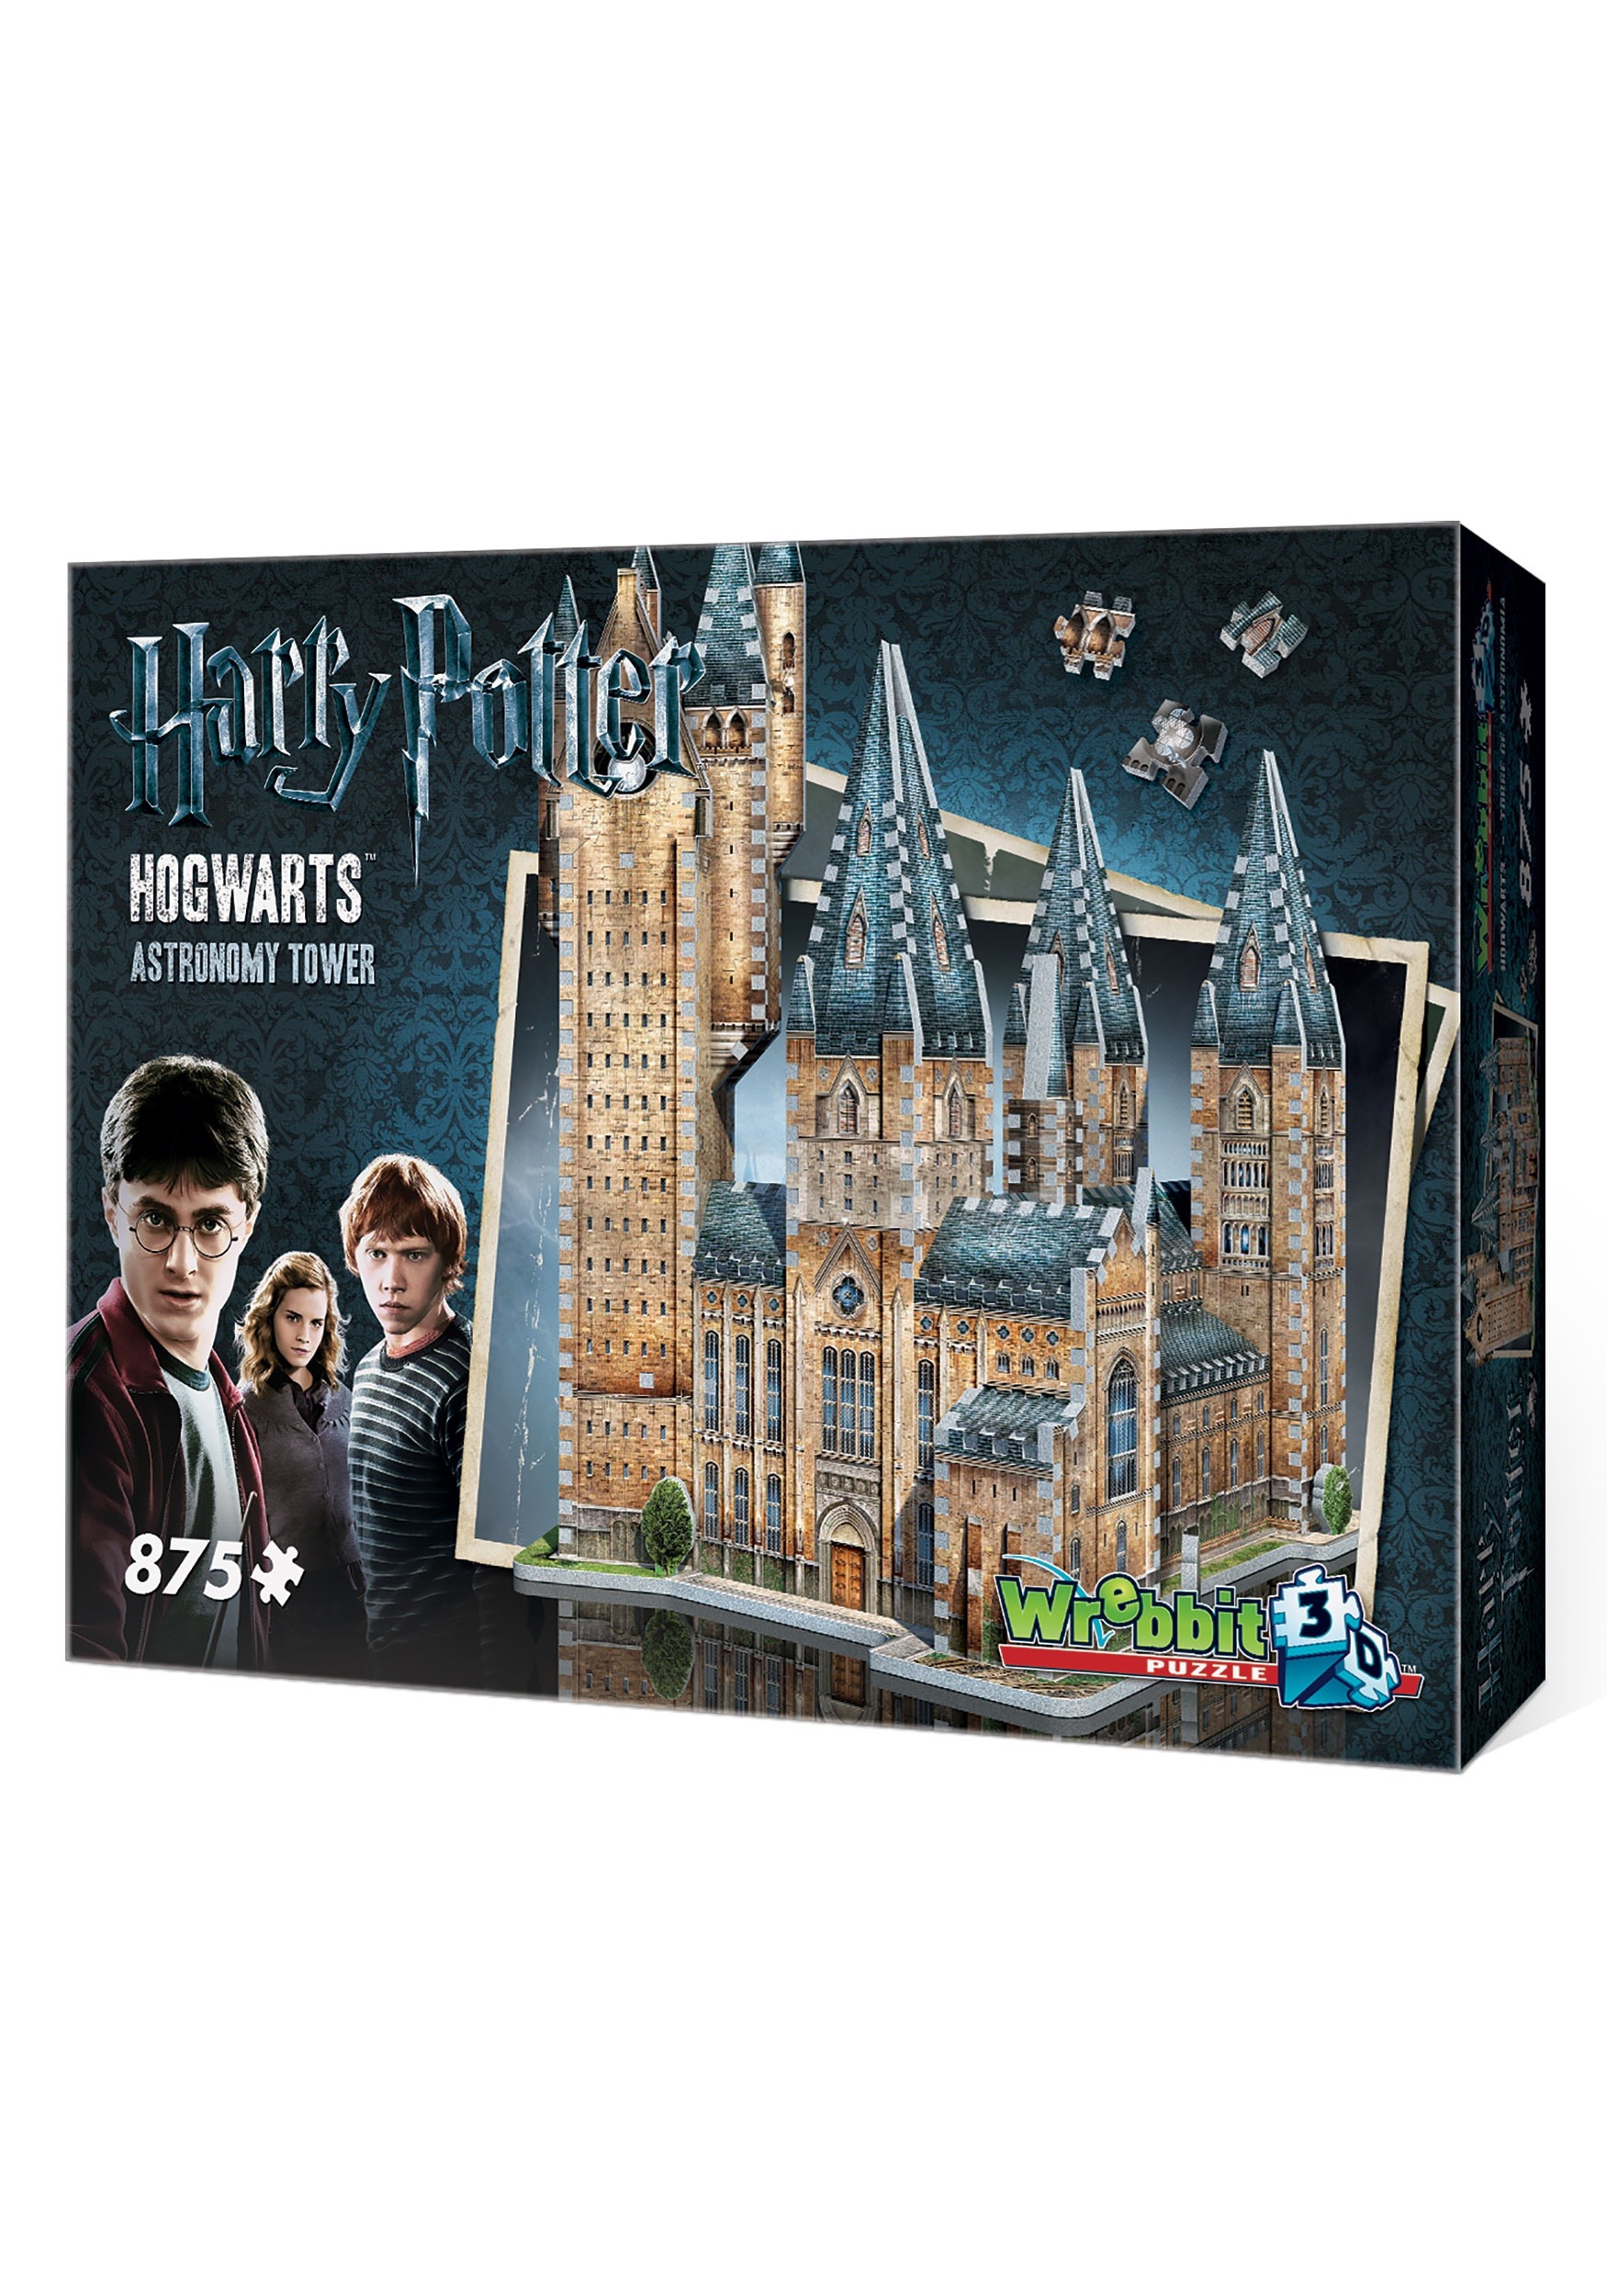 Hogwarts Astronomy Tower 3D Puzzle | Harry Potter Puzzle